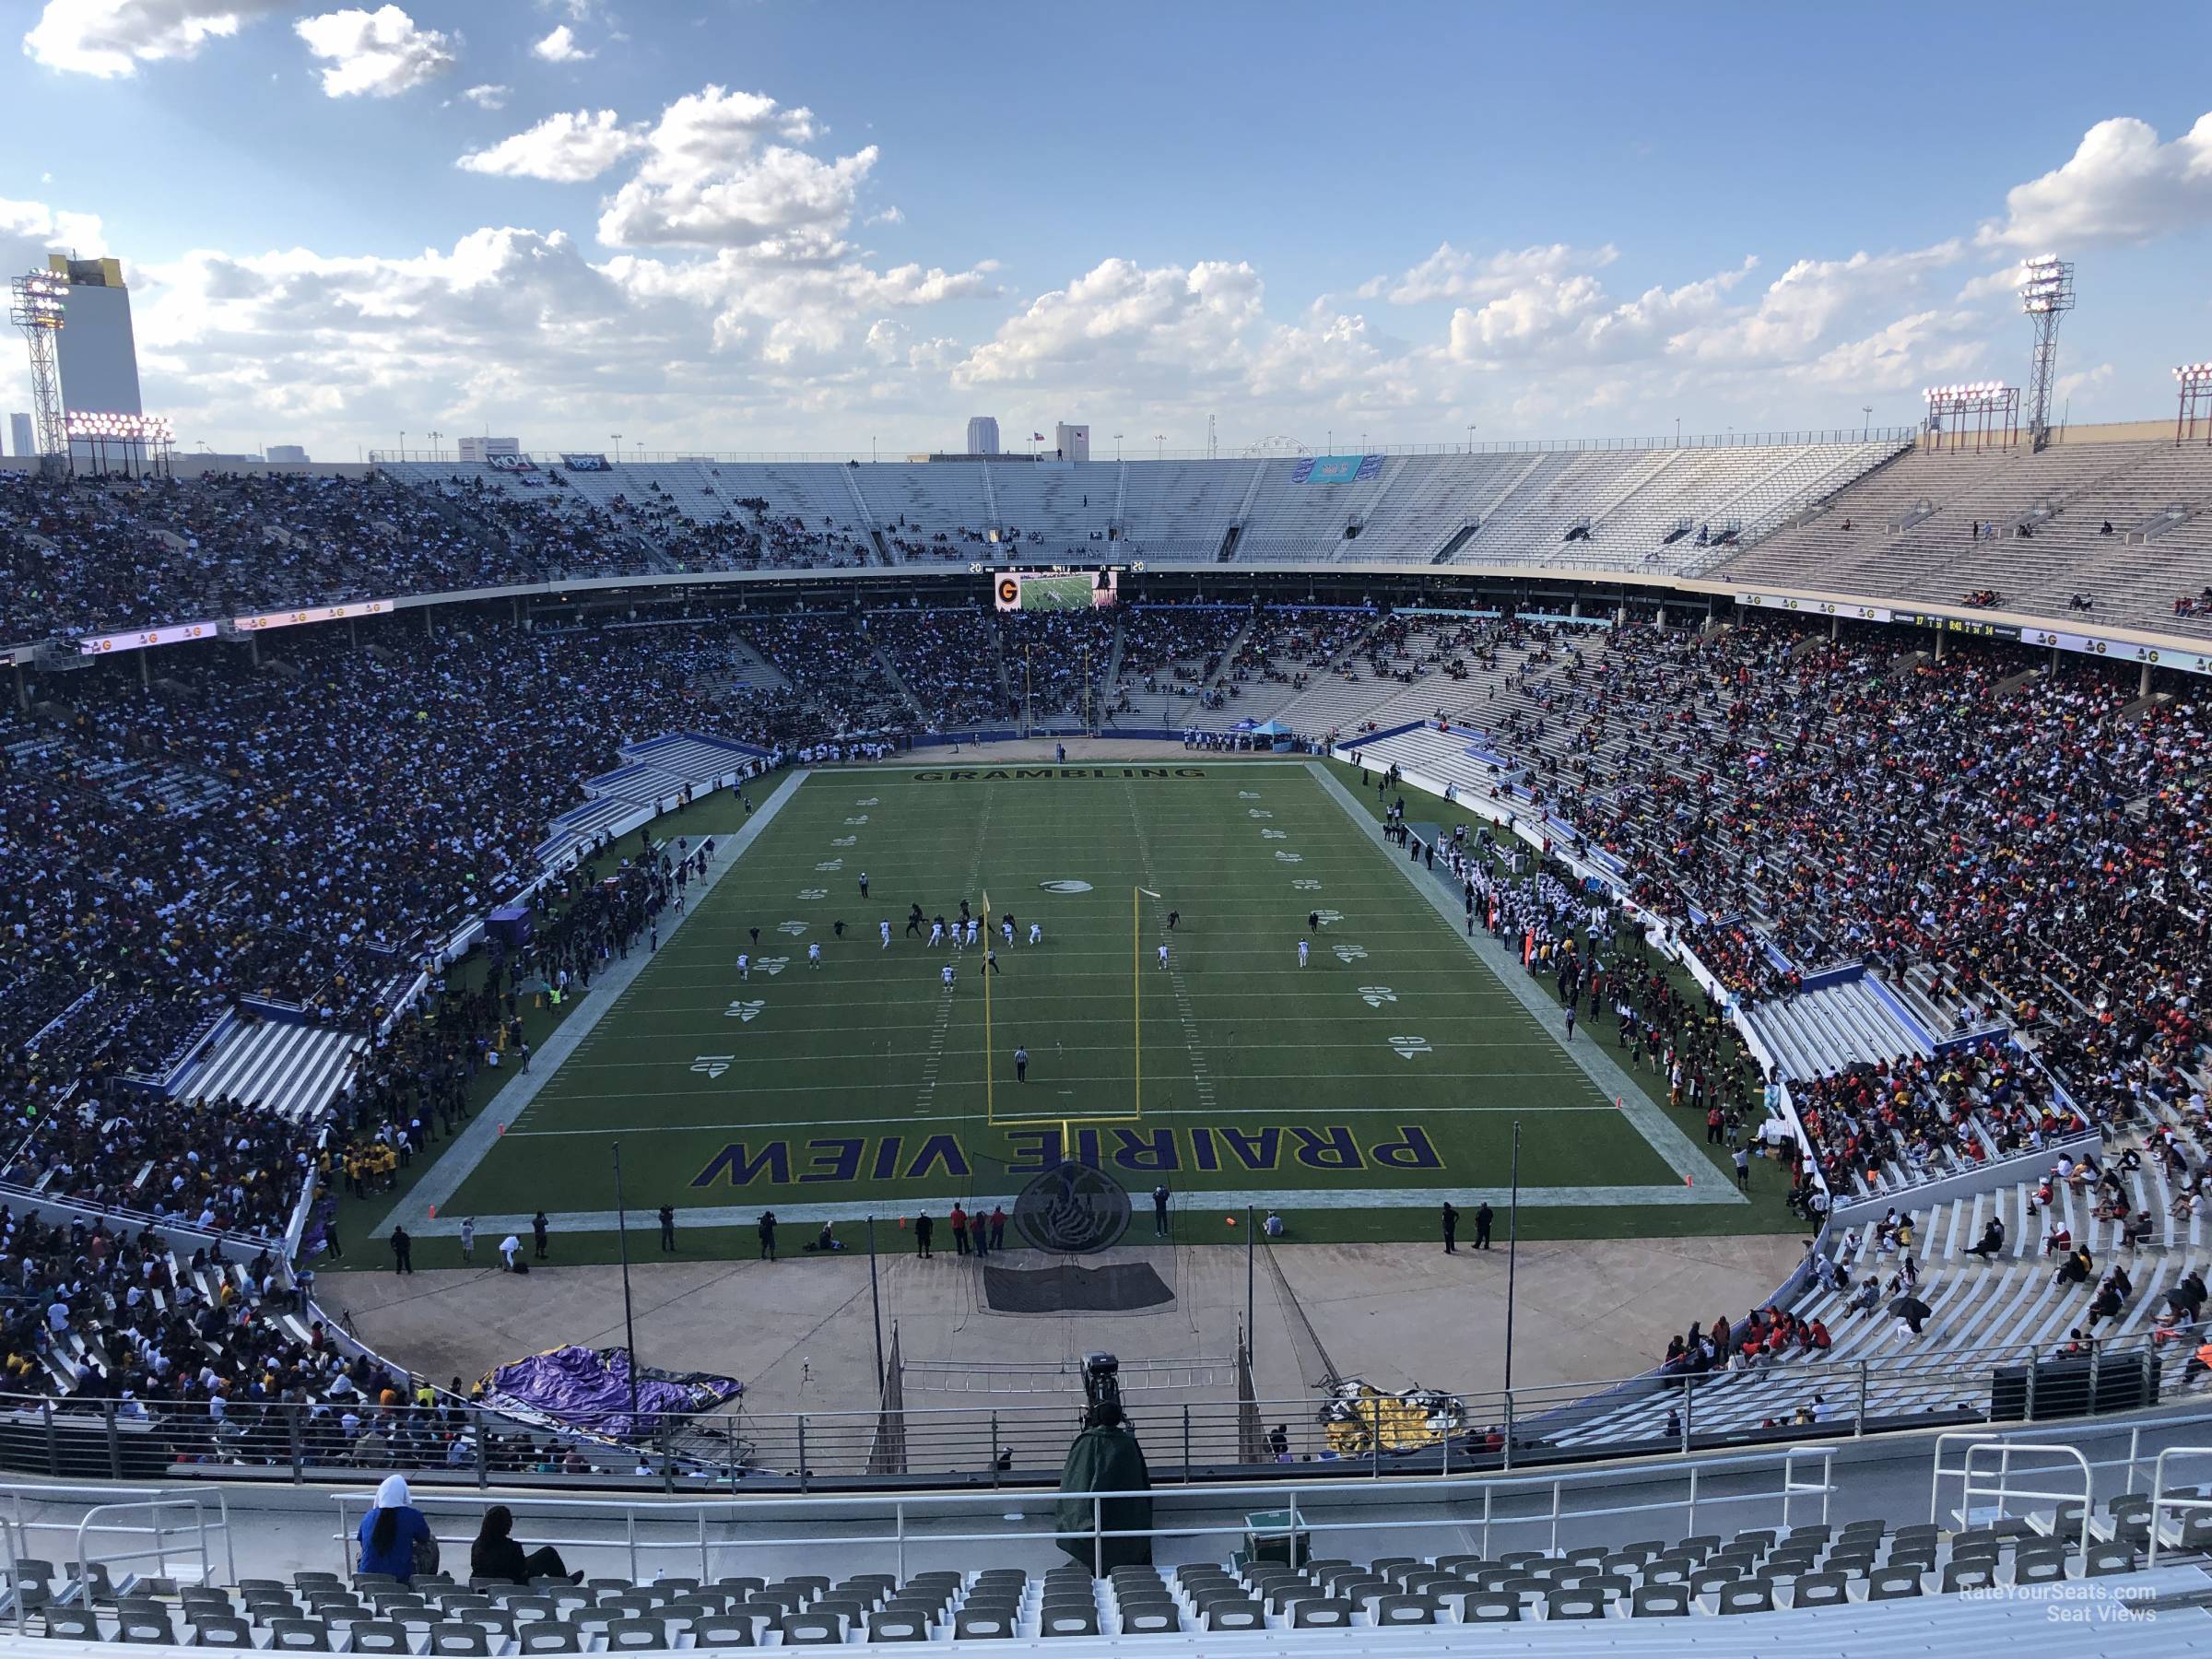 Section 139 at Cotton Bowl